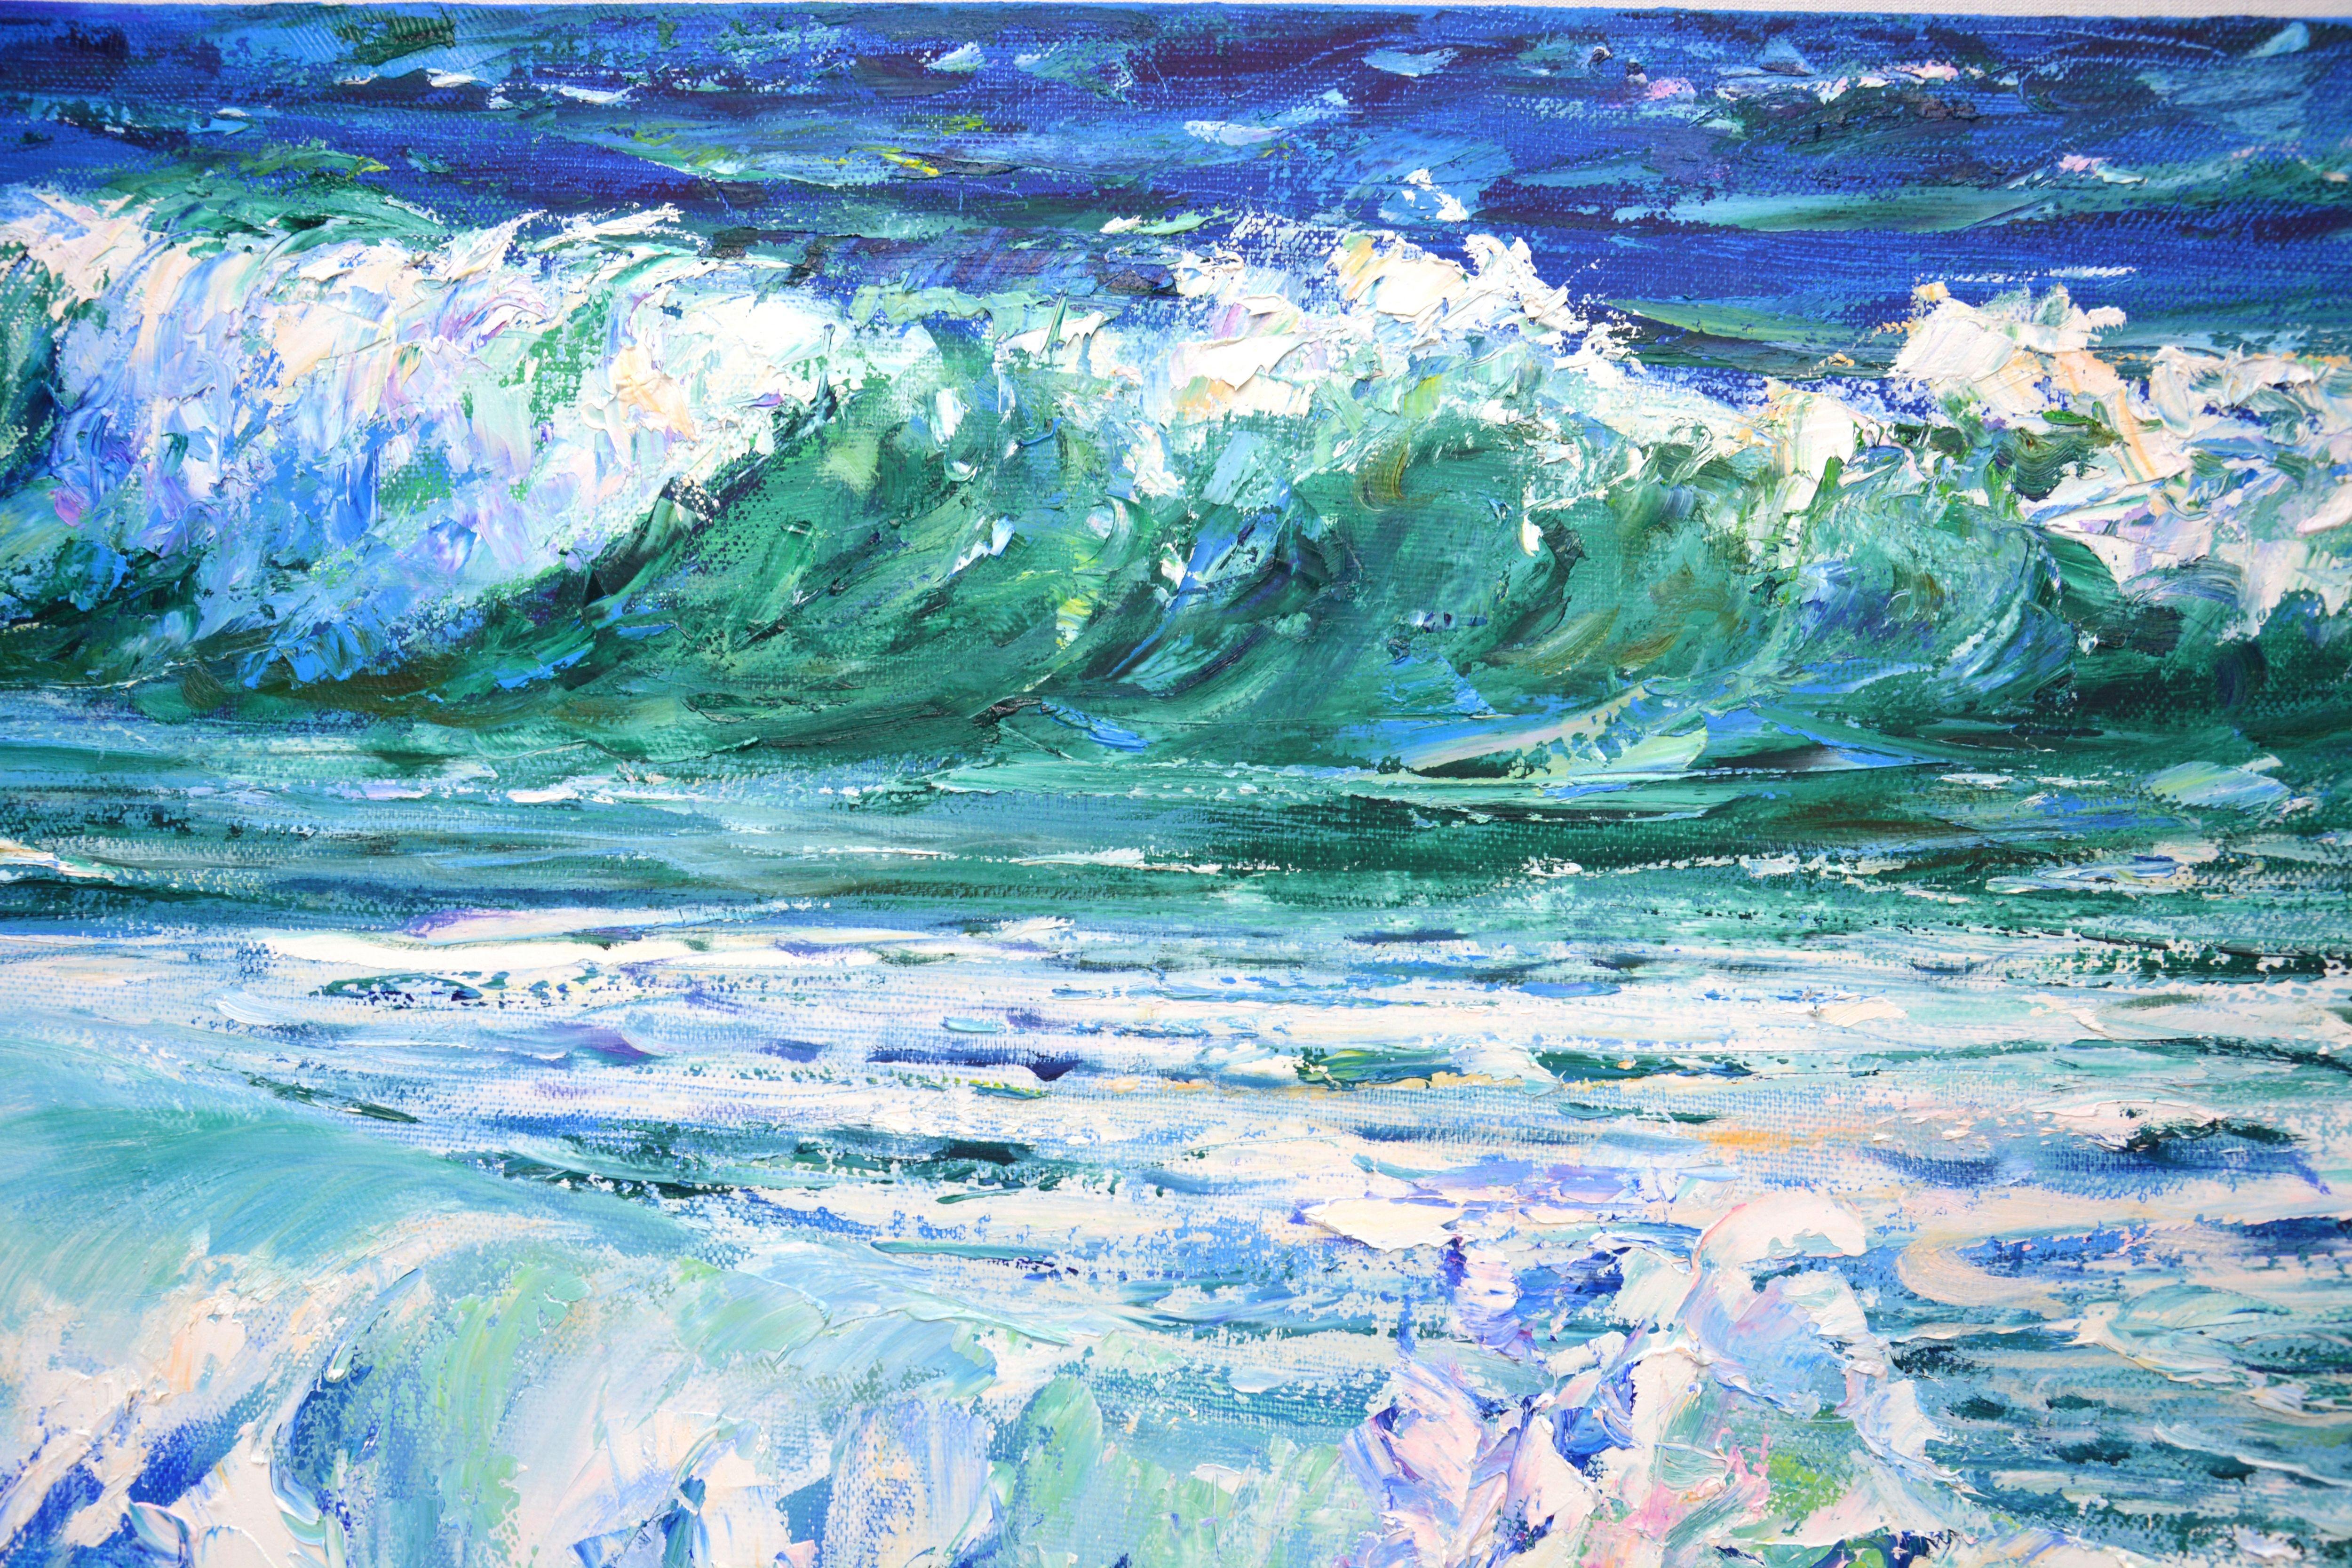 The ocean breathes with free wind, Painting, Oil on Canvas 3